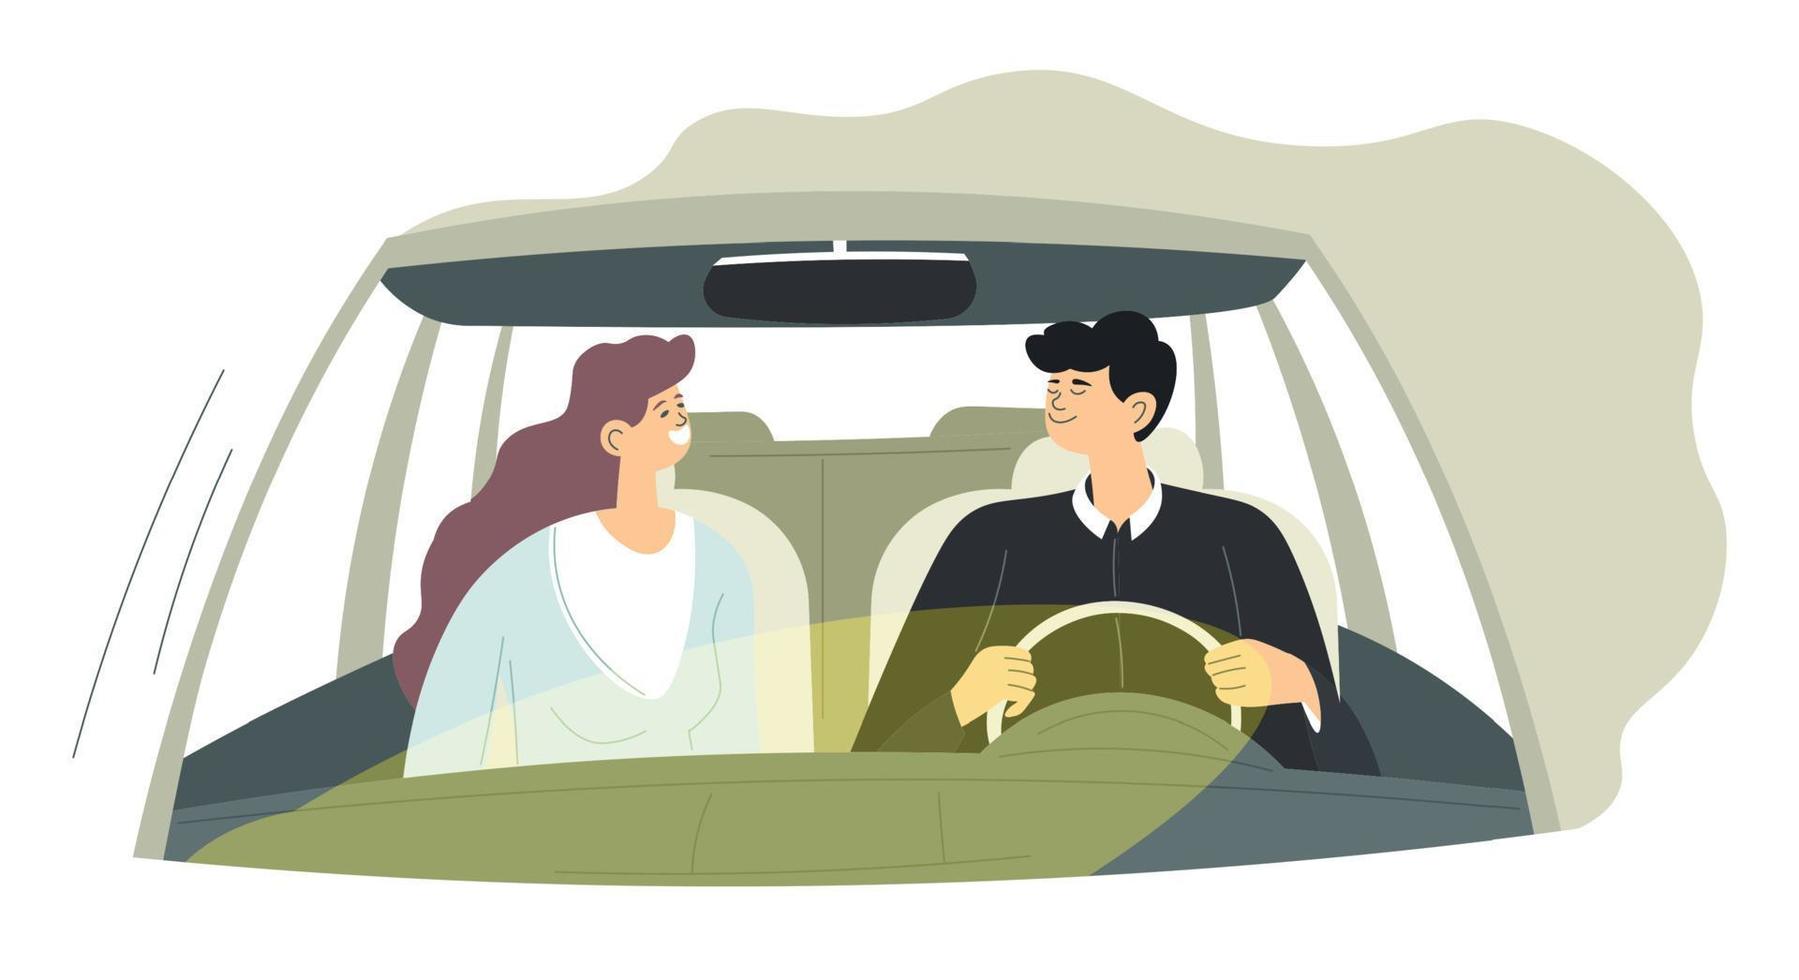 Man and woman driving car, couple on trip vector